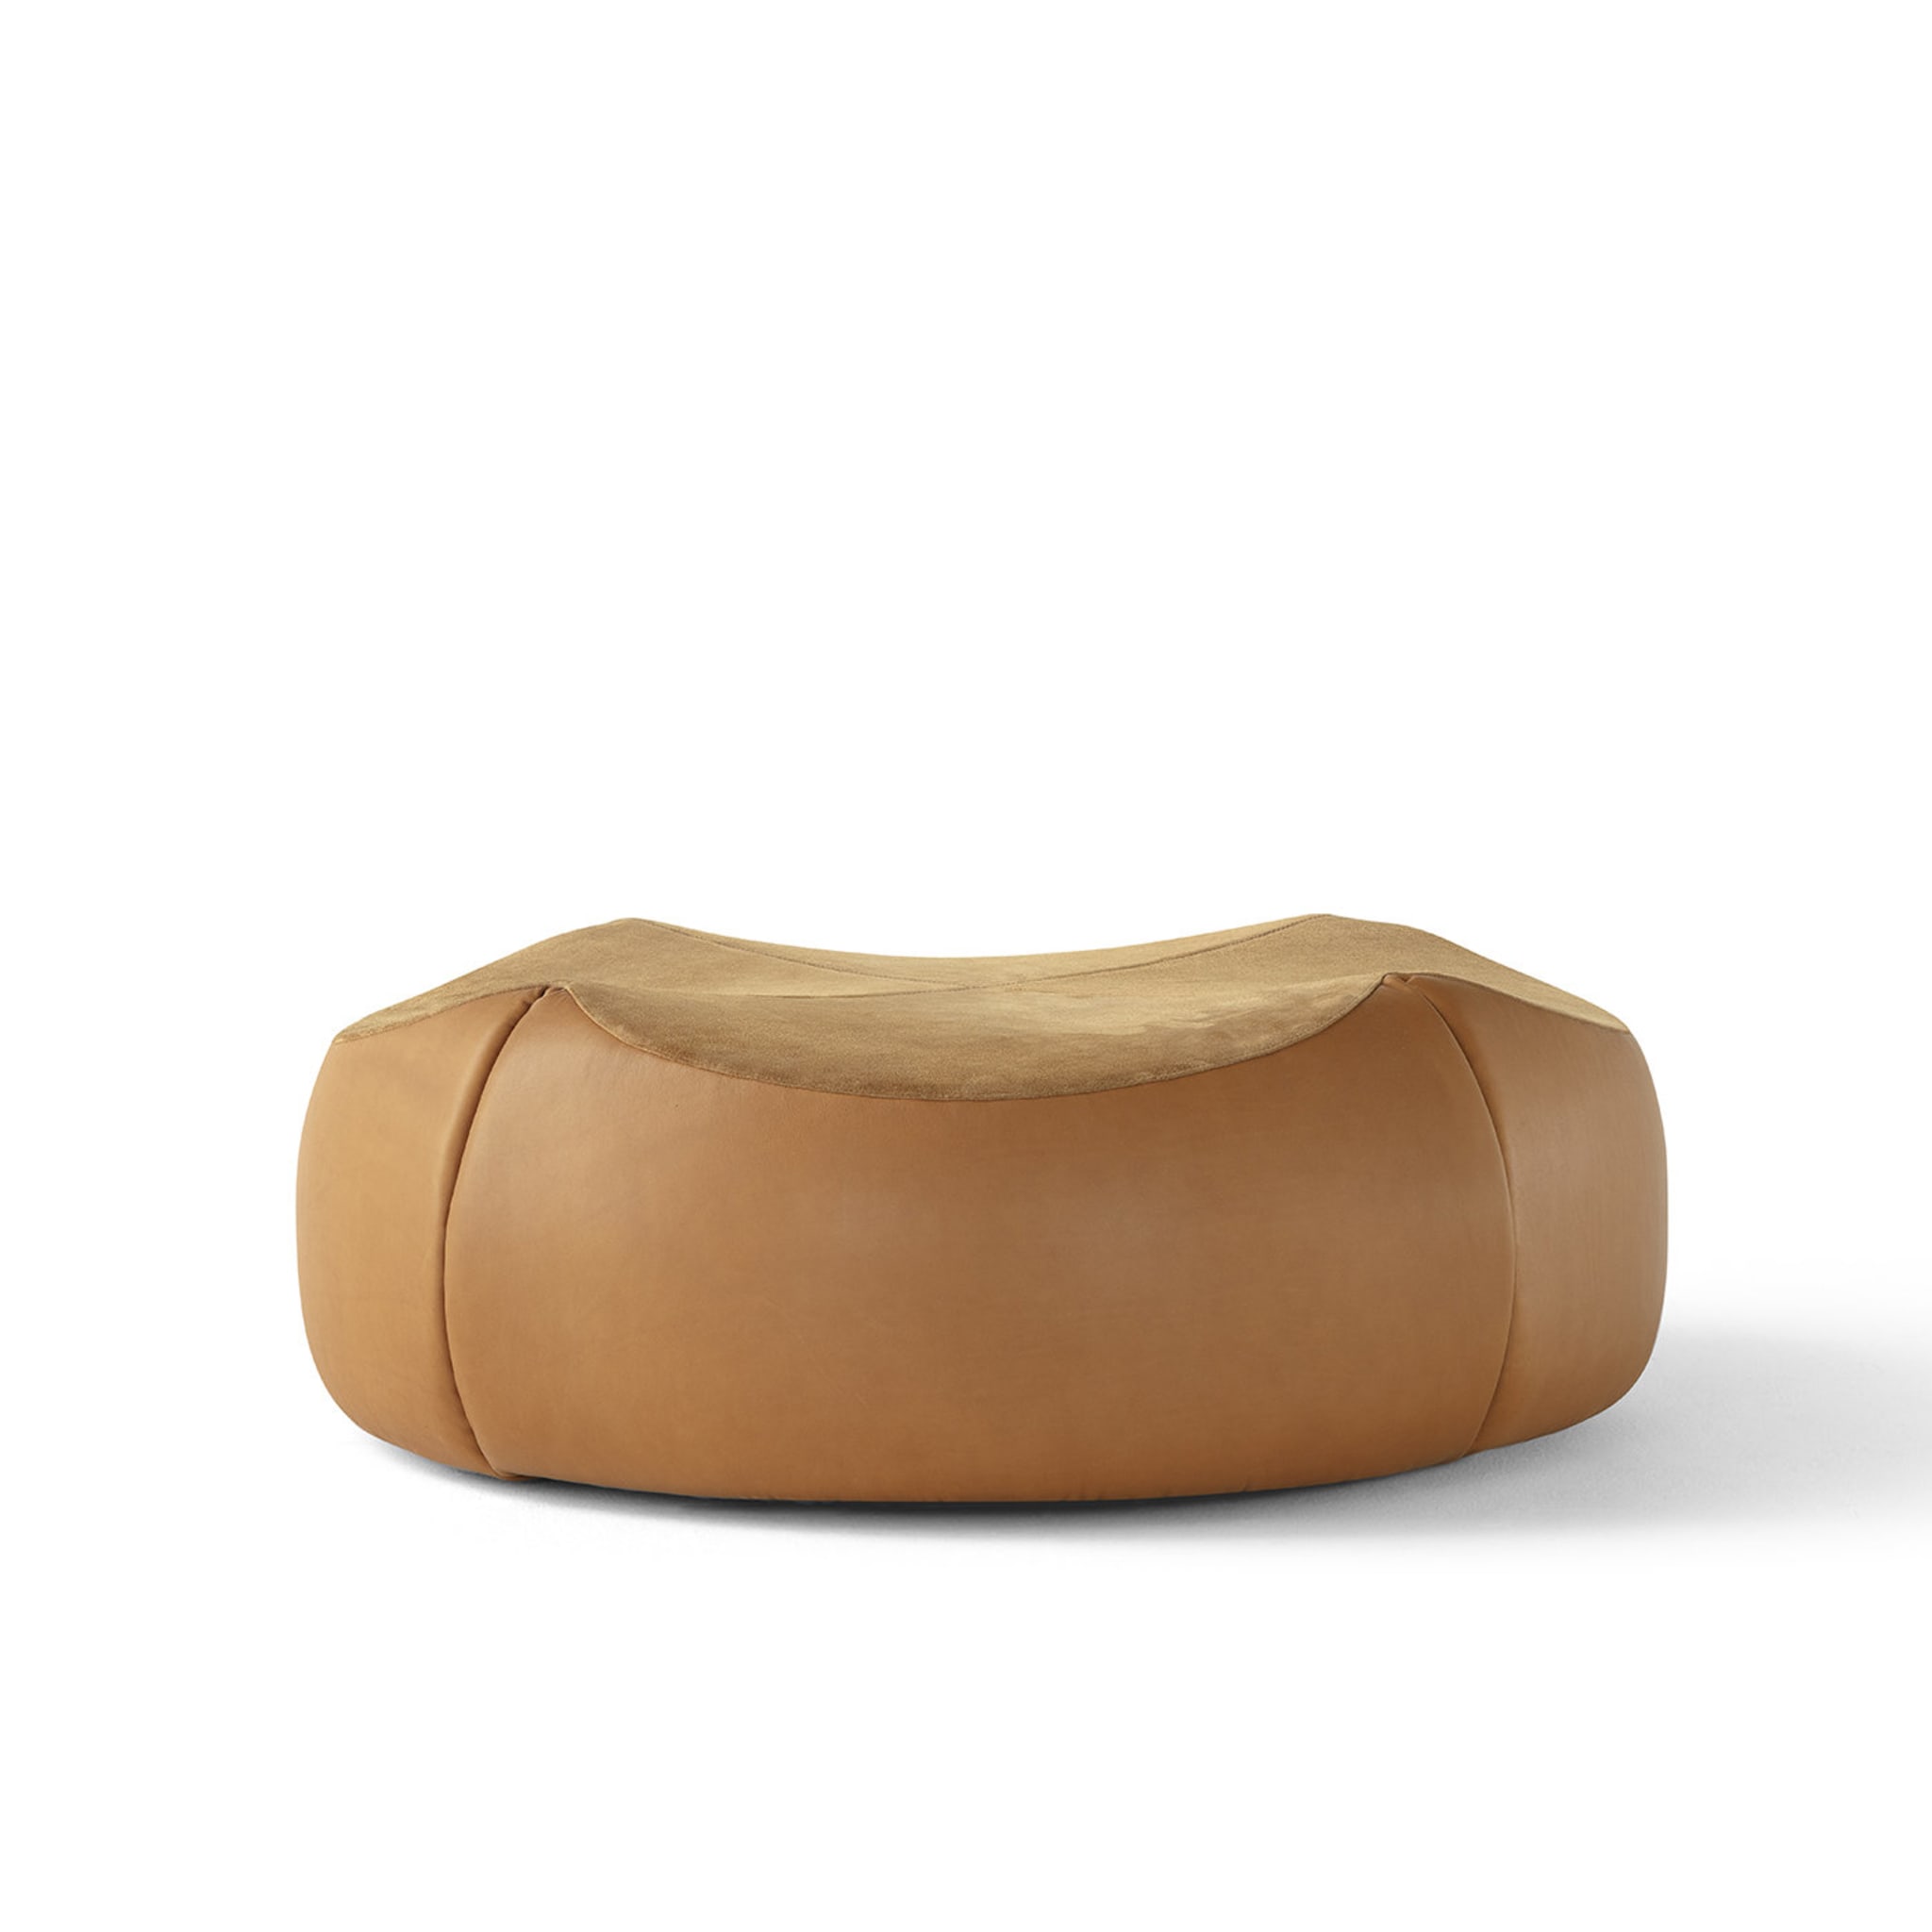 Panis Large Pouf by Anton Cristell and Emanuel Gargano - Alternative view 2